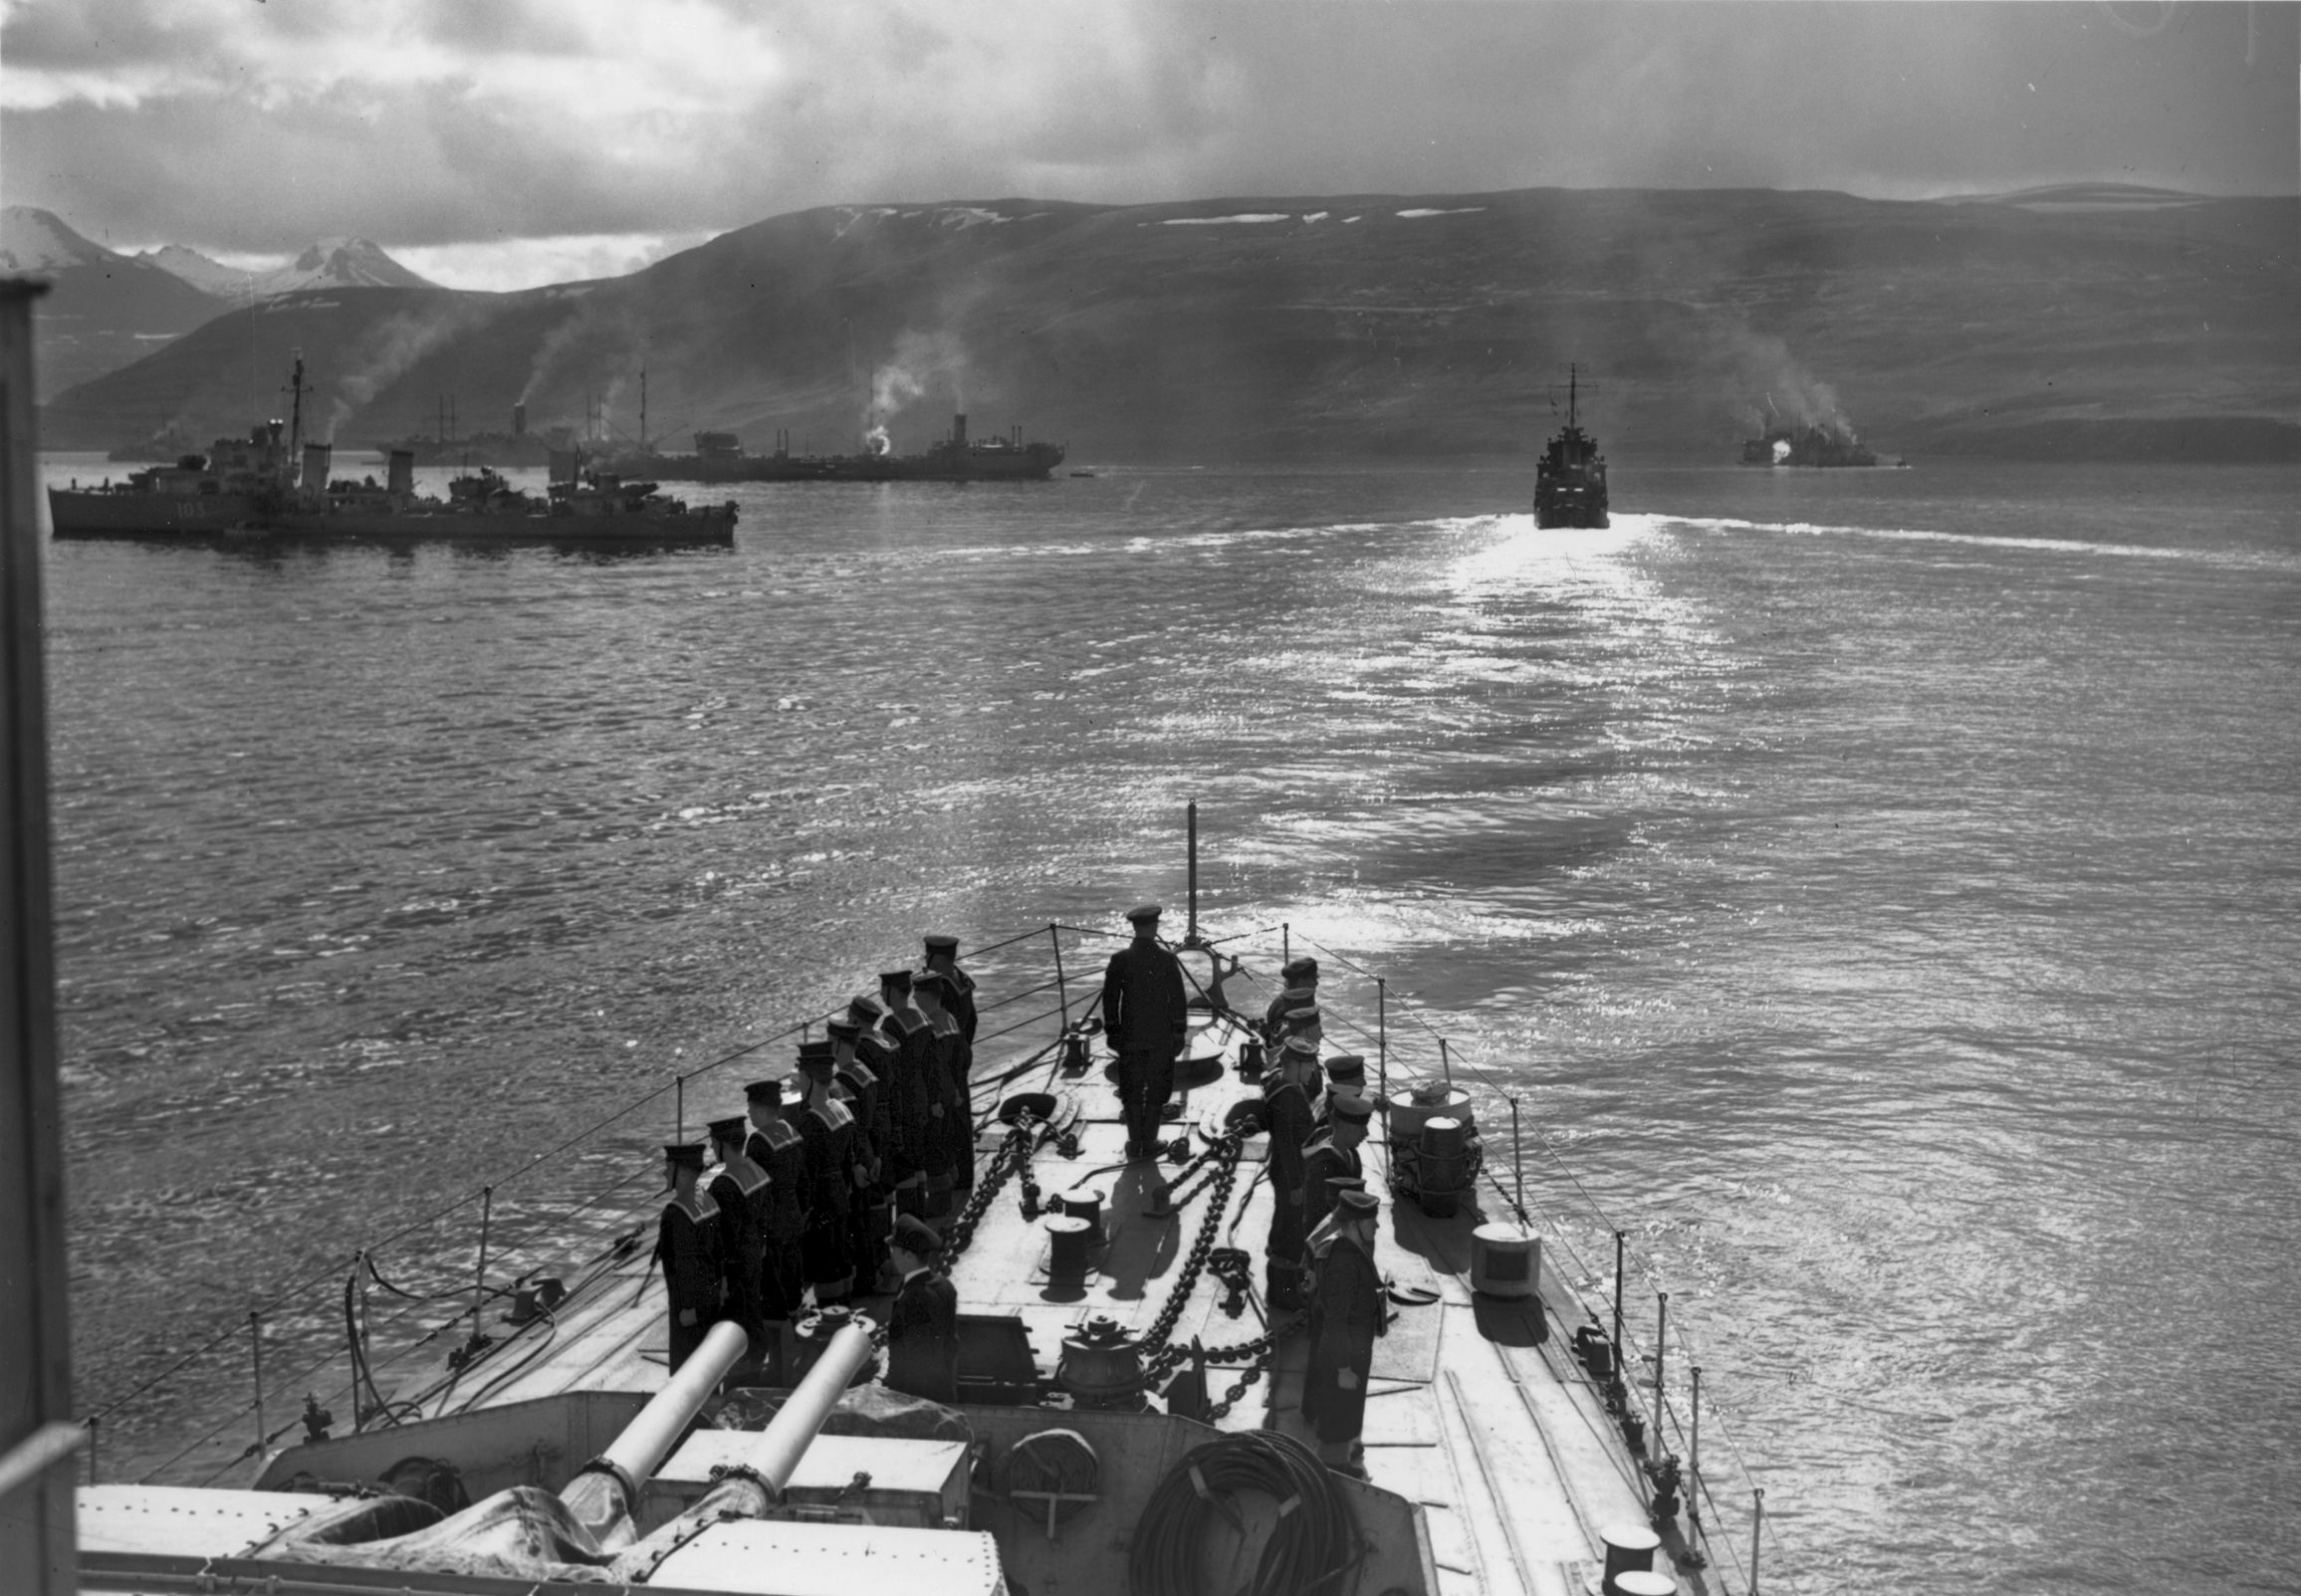 British destroyers and Soviet tankers that made up a portion of Convoy PQ-17 assemble in an Icelandic fjord in June 1942.  